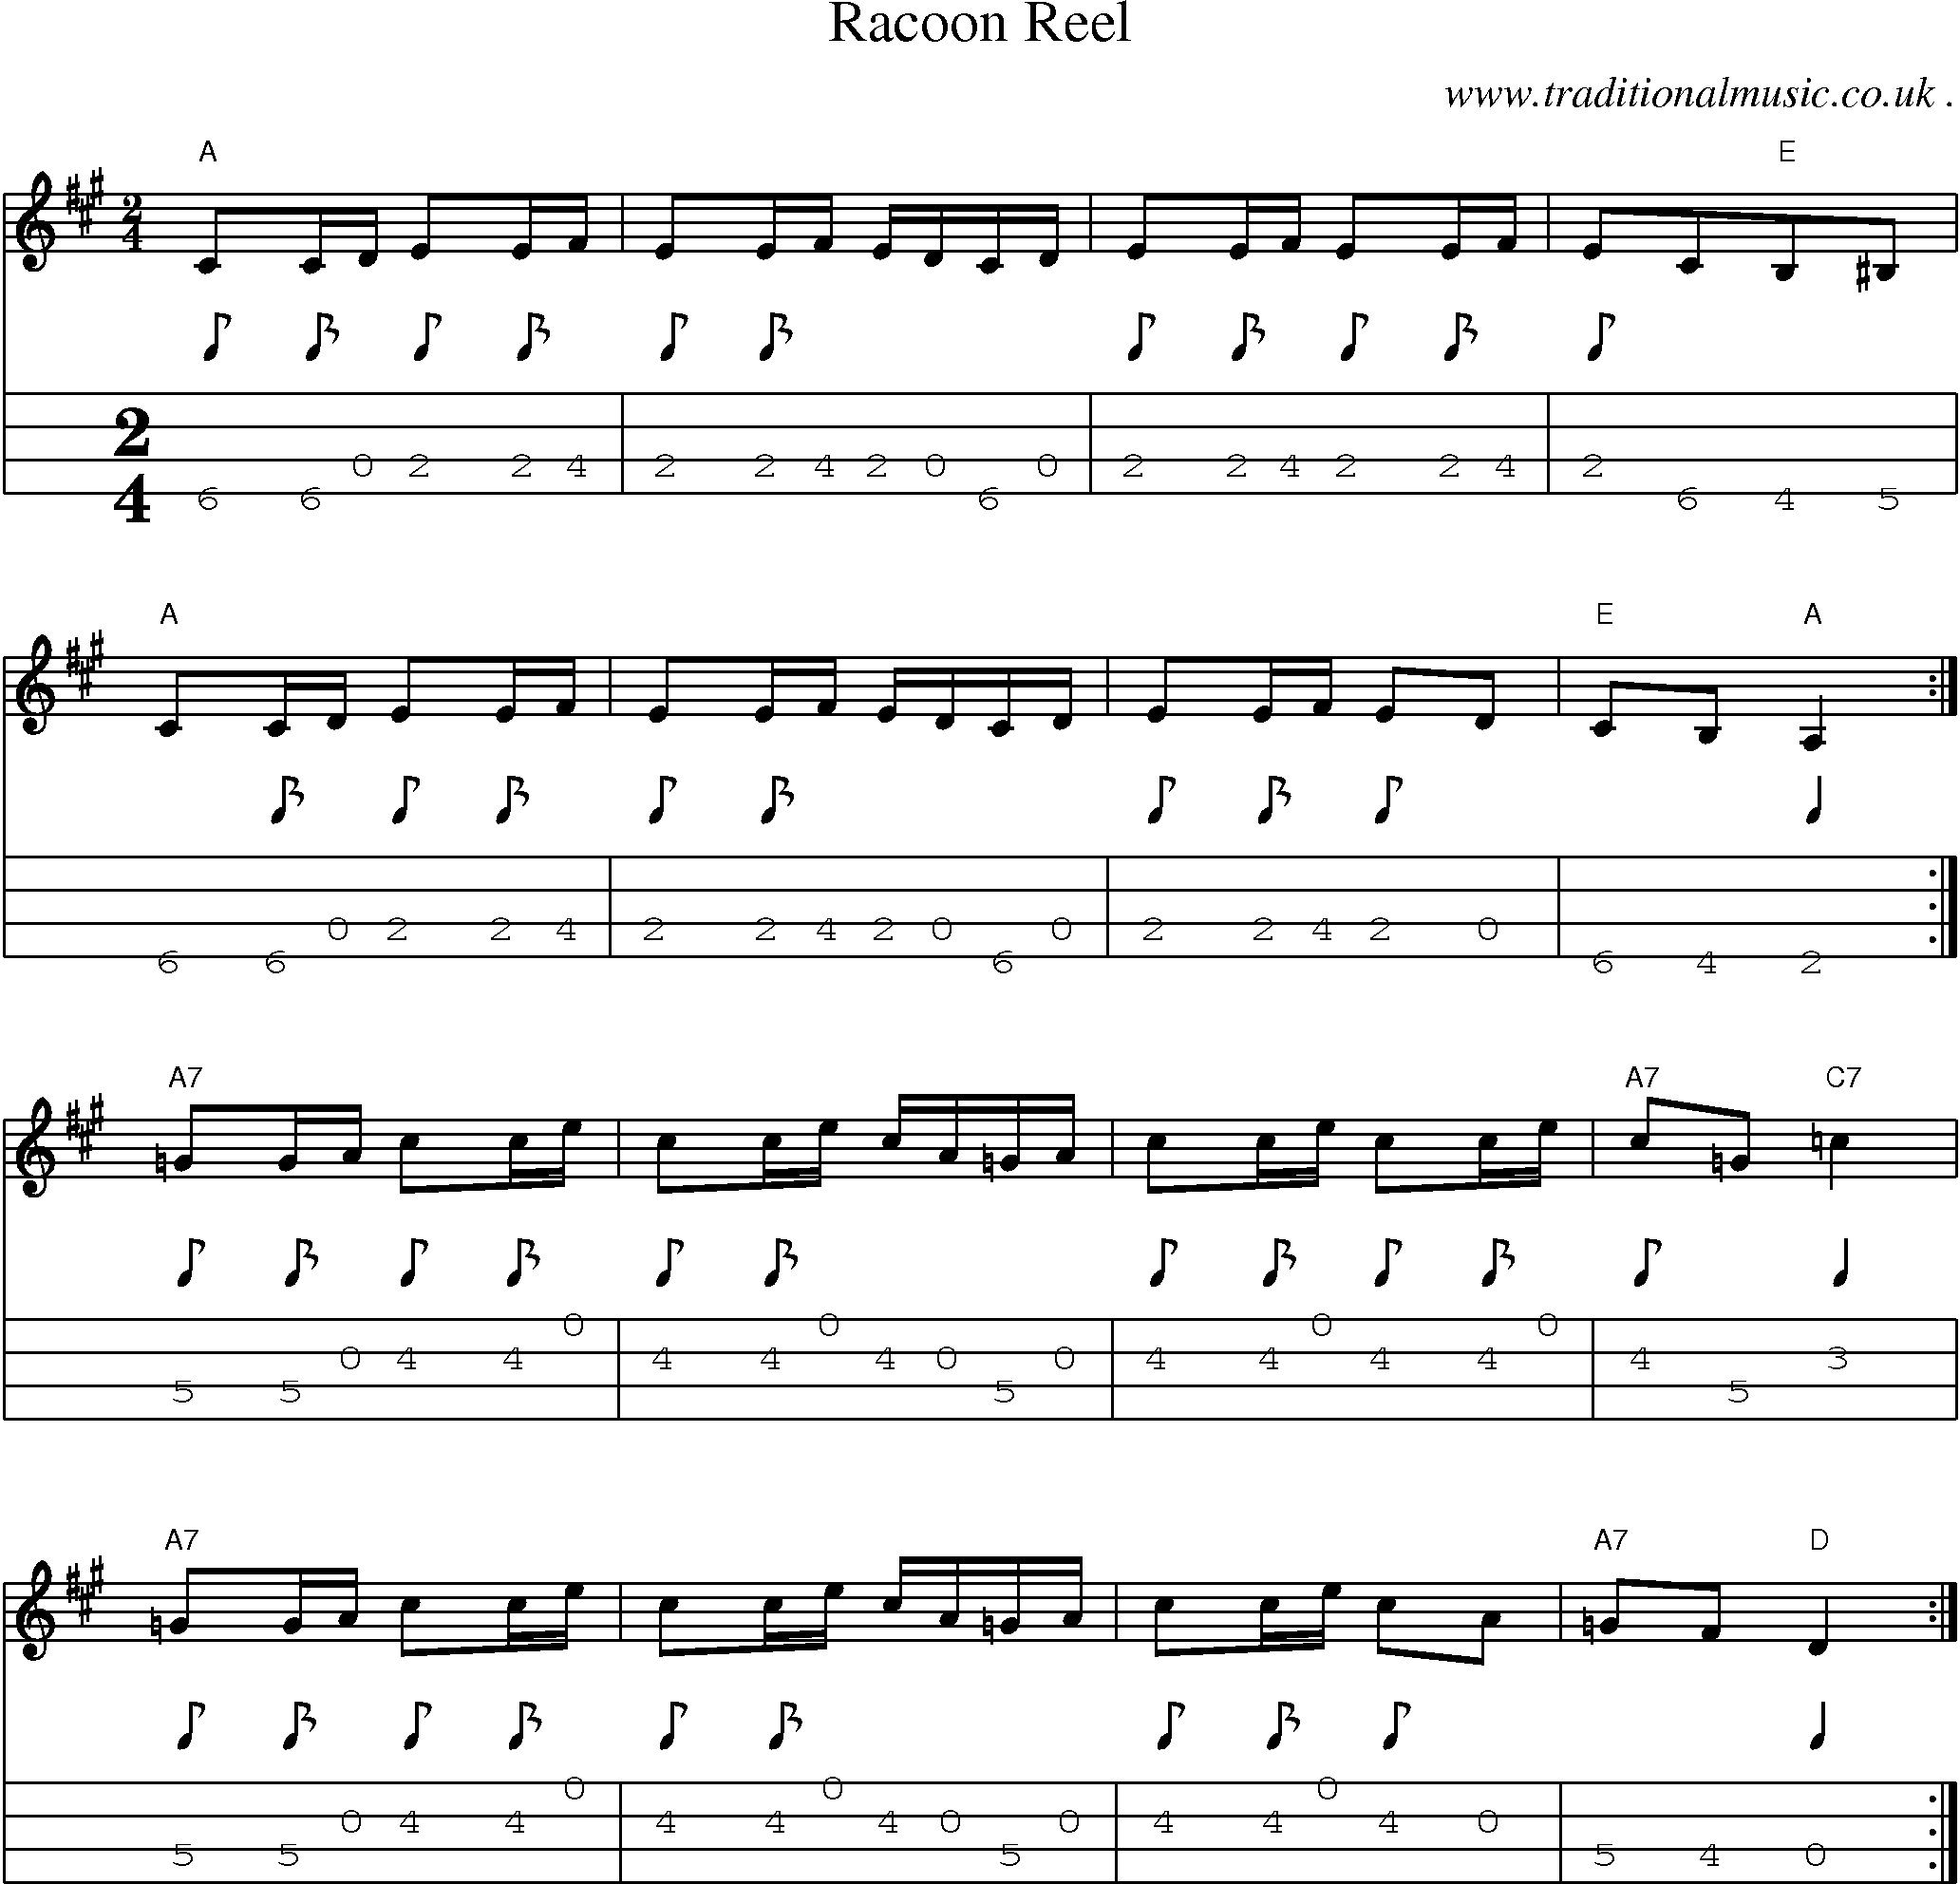 Sheet-Music and Mandolin Tabs for Racoon Reel